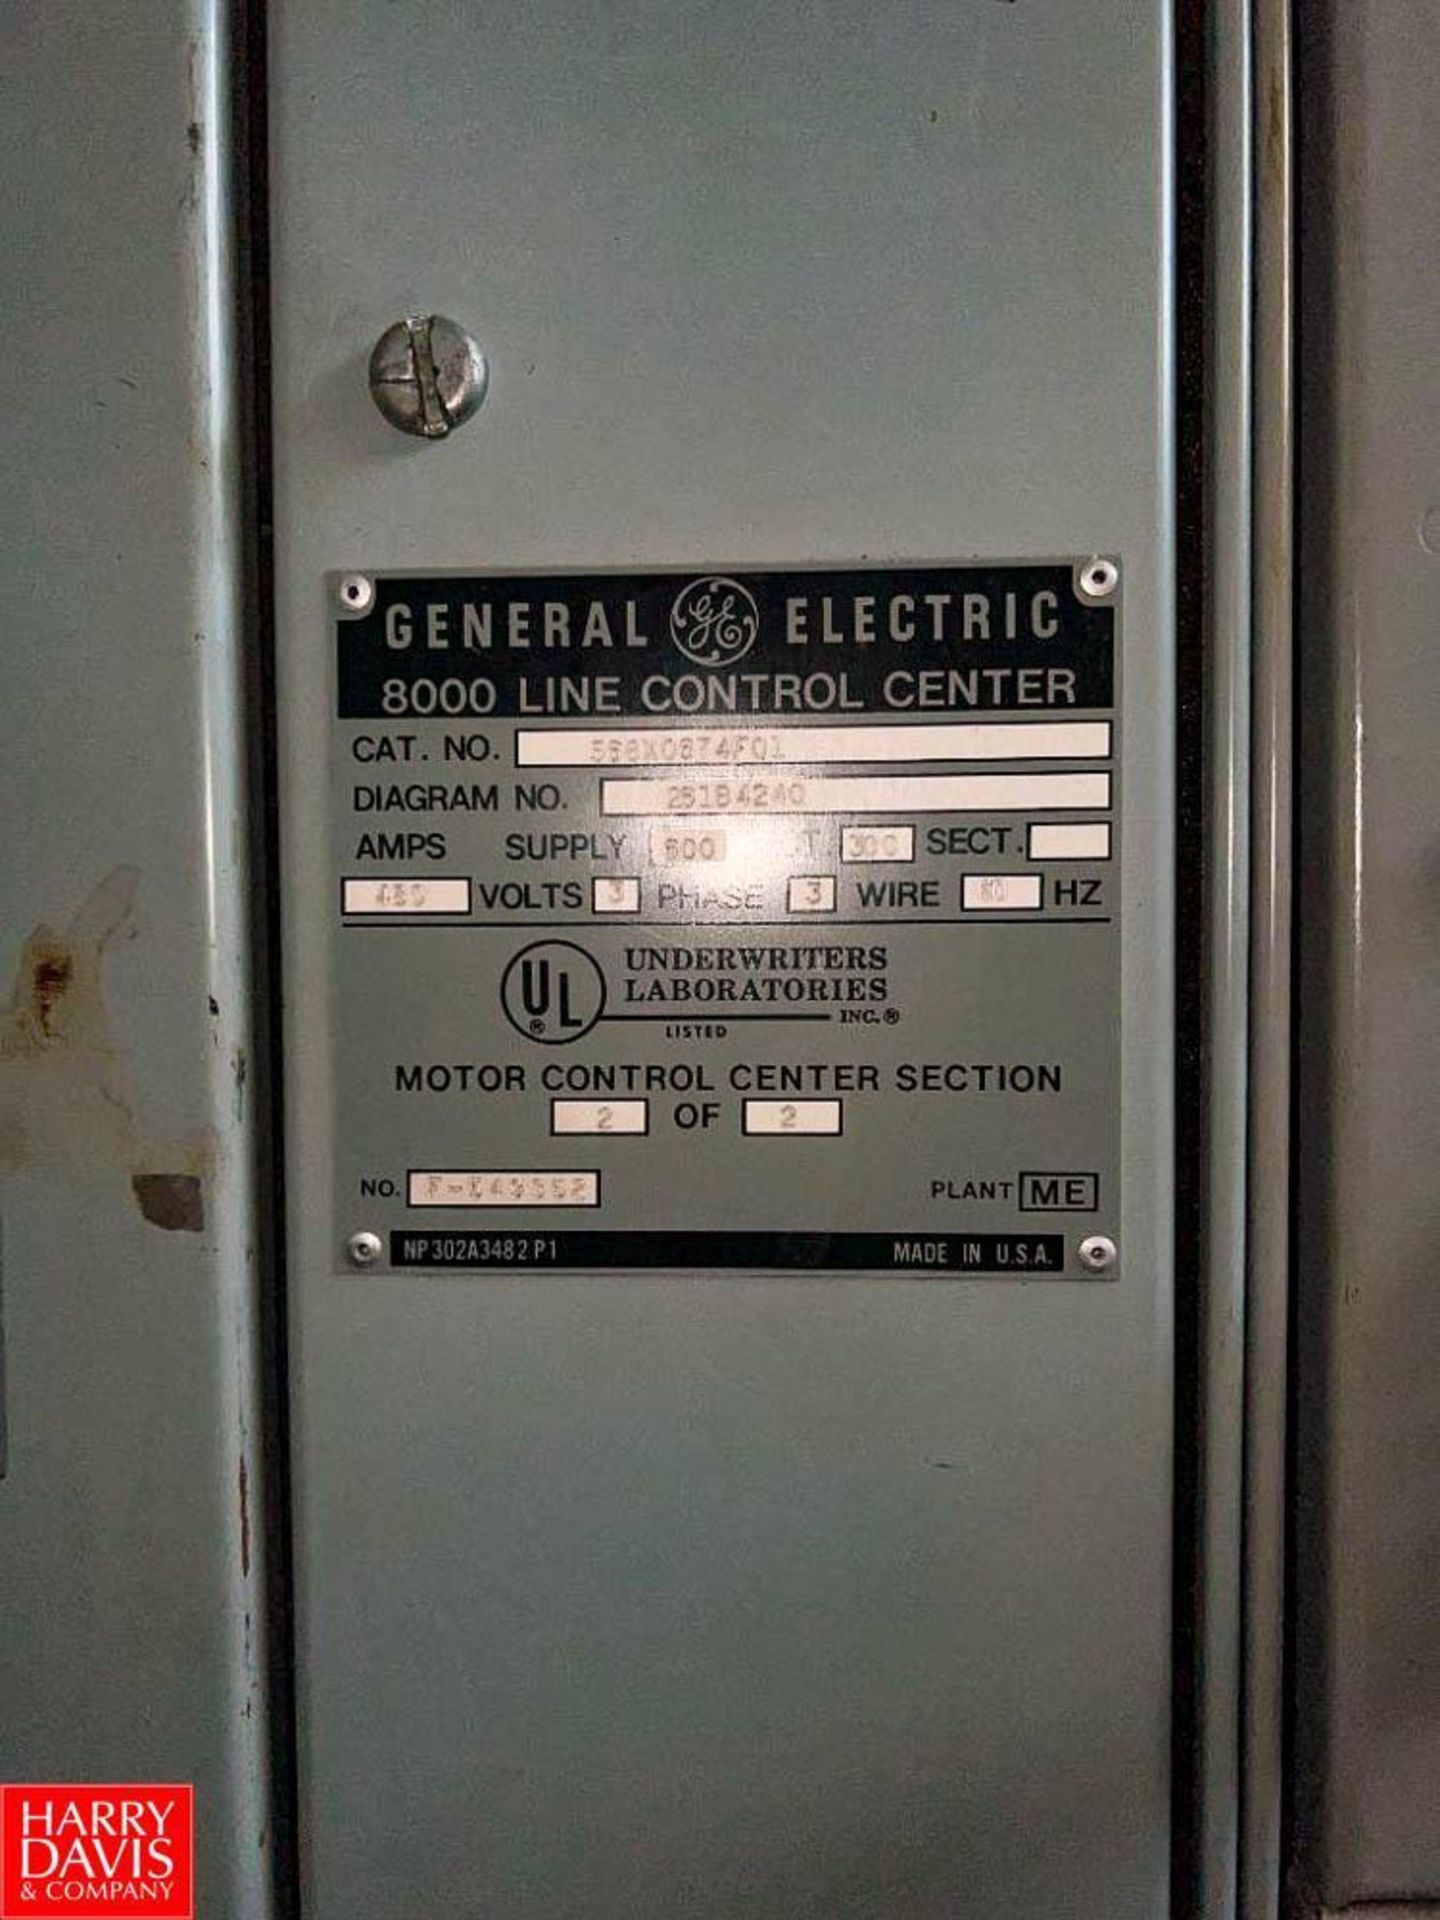 General Electric 8000 Line Control Center with (27) Disconnects, 600 Supply Amps and 300 Section Amp - Image 4 of 6